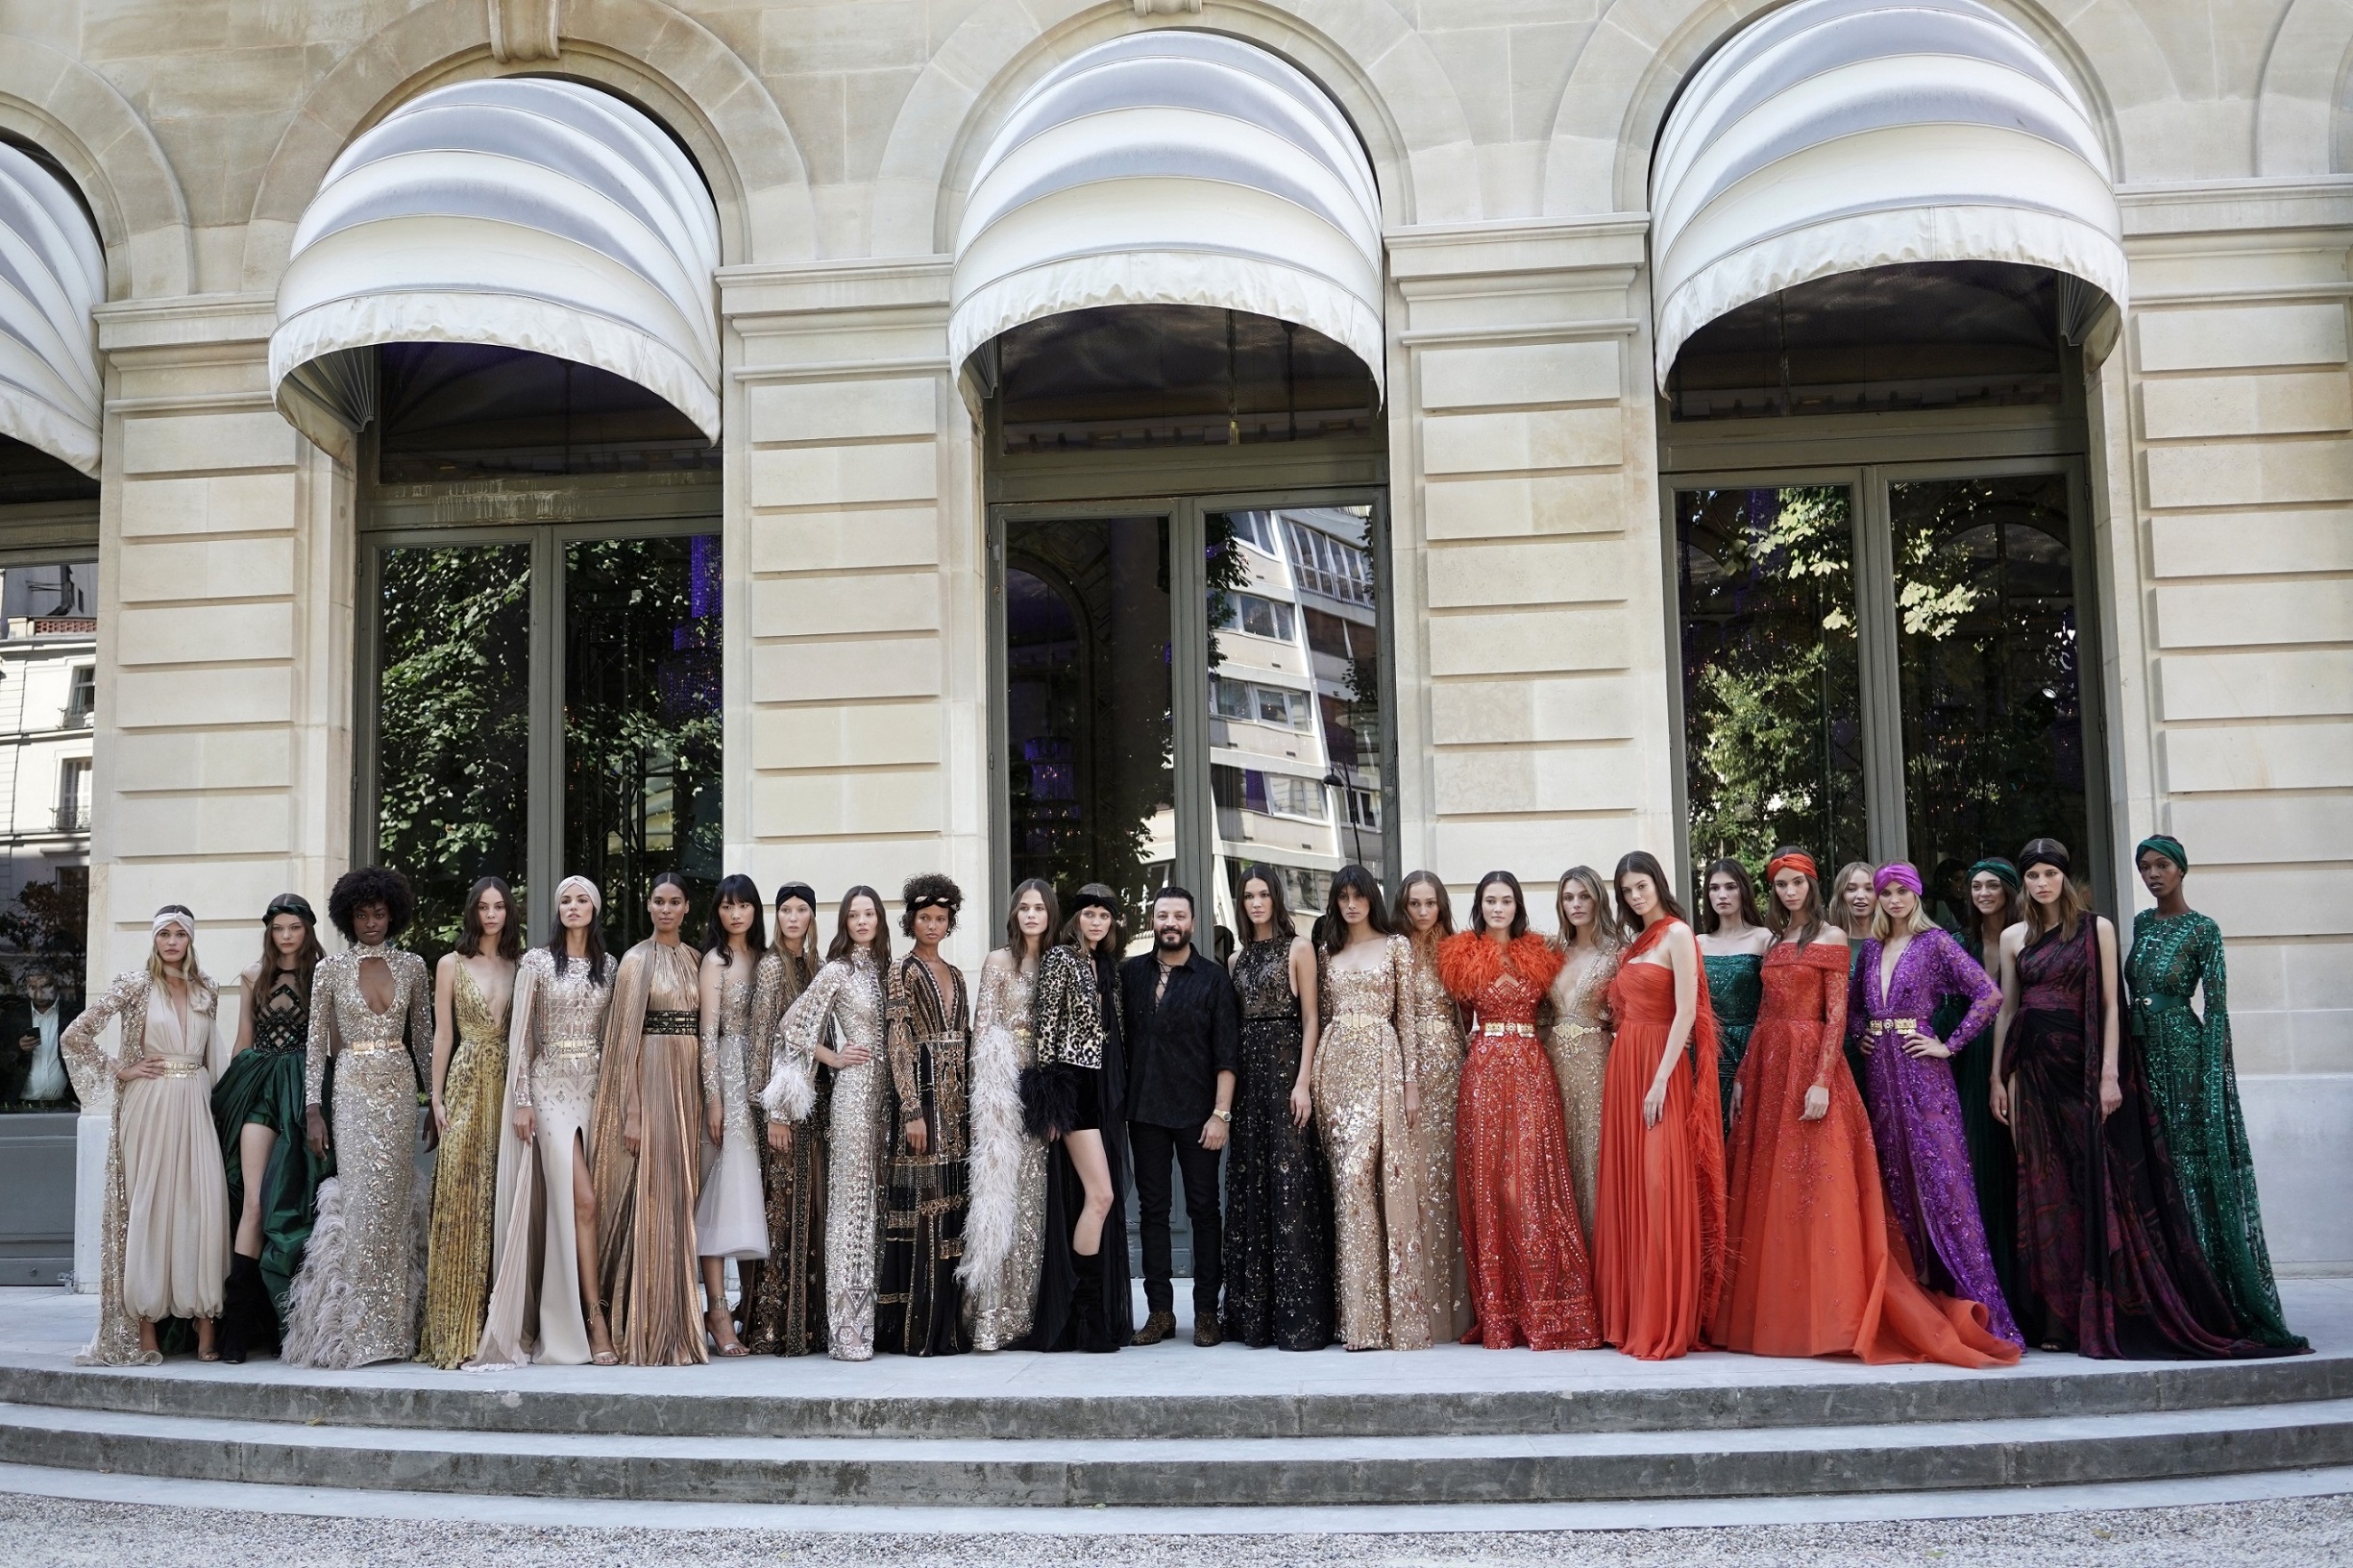 PARIS, FRANCE - JULY 03: Models pose with Designer Zuhair Murad after the Zuhair Murad Haute Couture Fall/Winter 2019 2020 show as part of Paris Fashion Week on July 03, 2019 in Paris, France. (Photo by Vittorio Zunino Celotto/Getty Images)